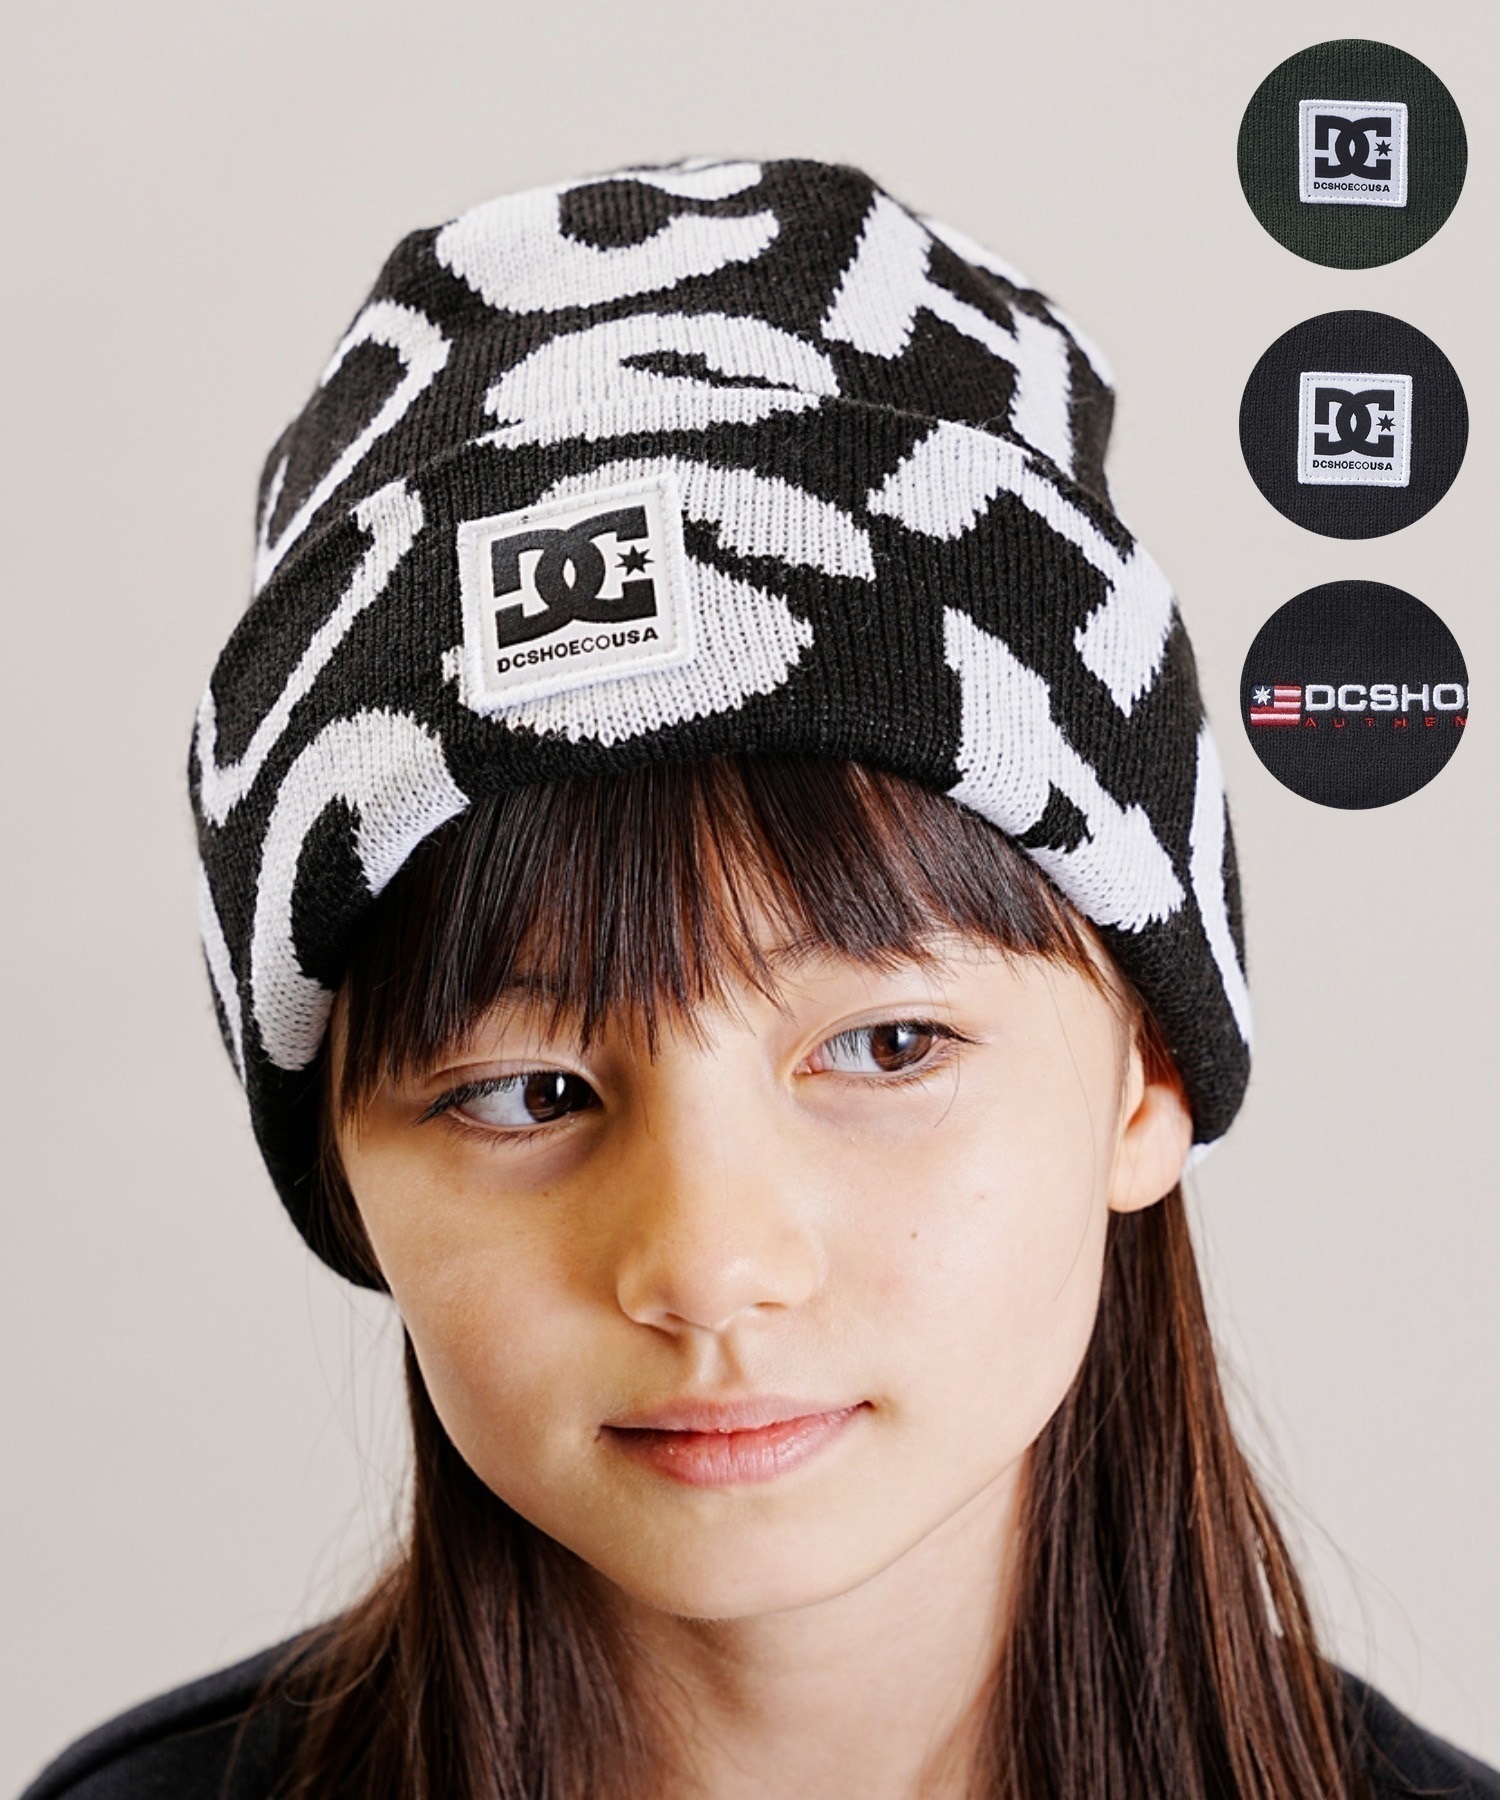 DC/ディーシー 23 KD DOUBLE WATCH LOGO BEANIE キッズ ビーニー ニットキャップ 帽子 YBE234630(GRN-FREE)